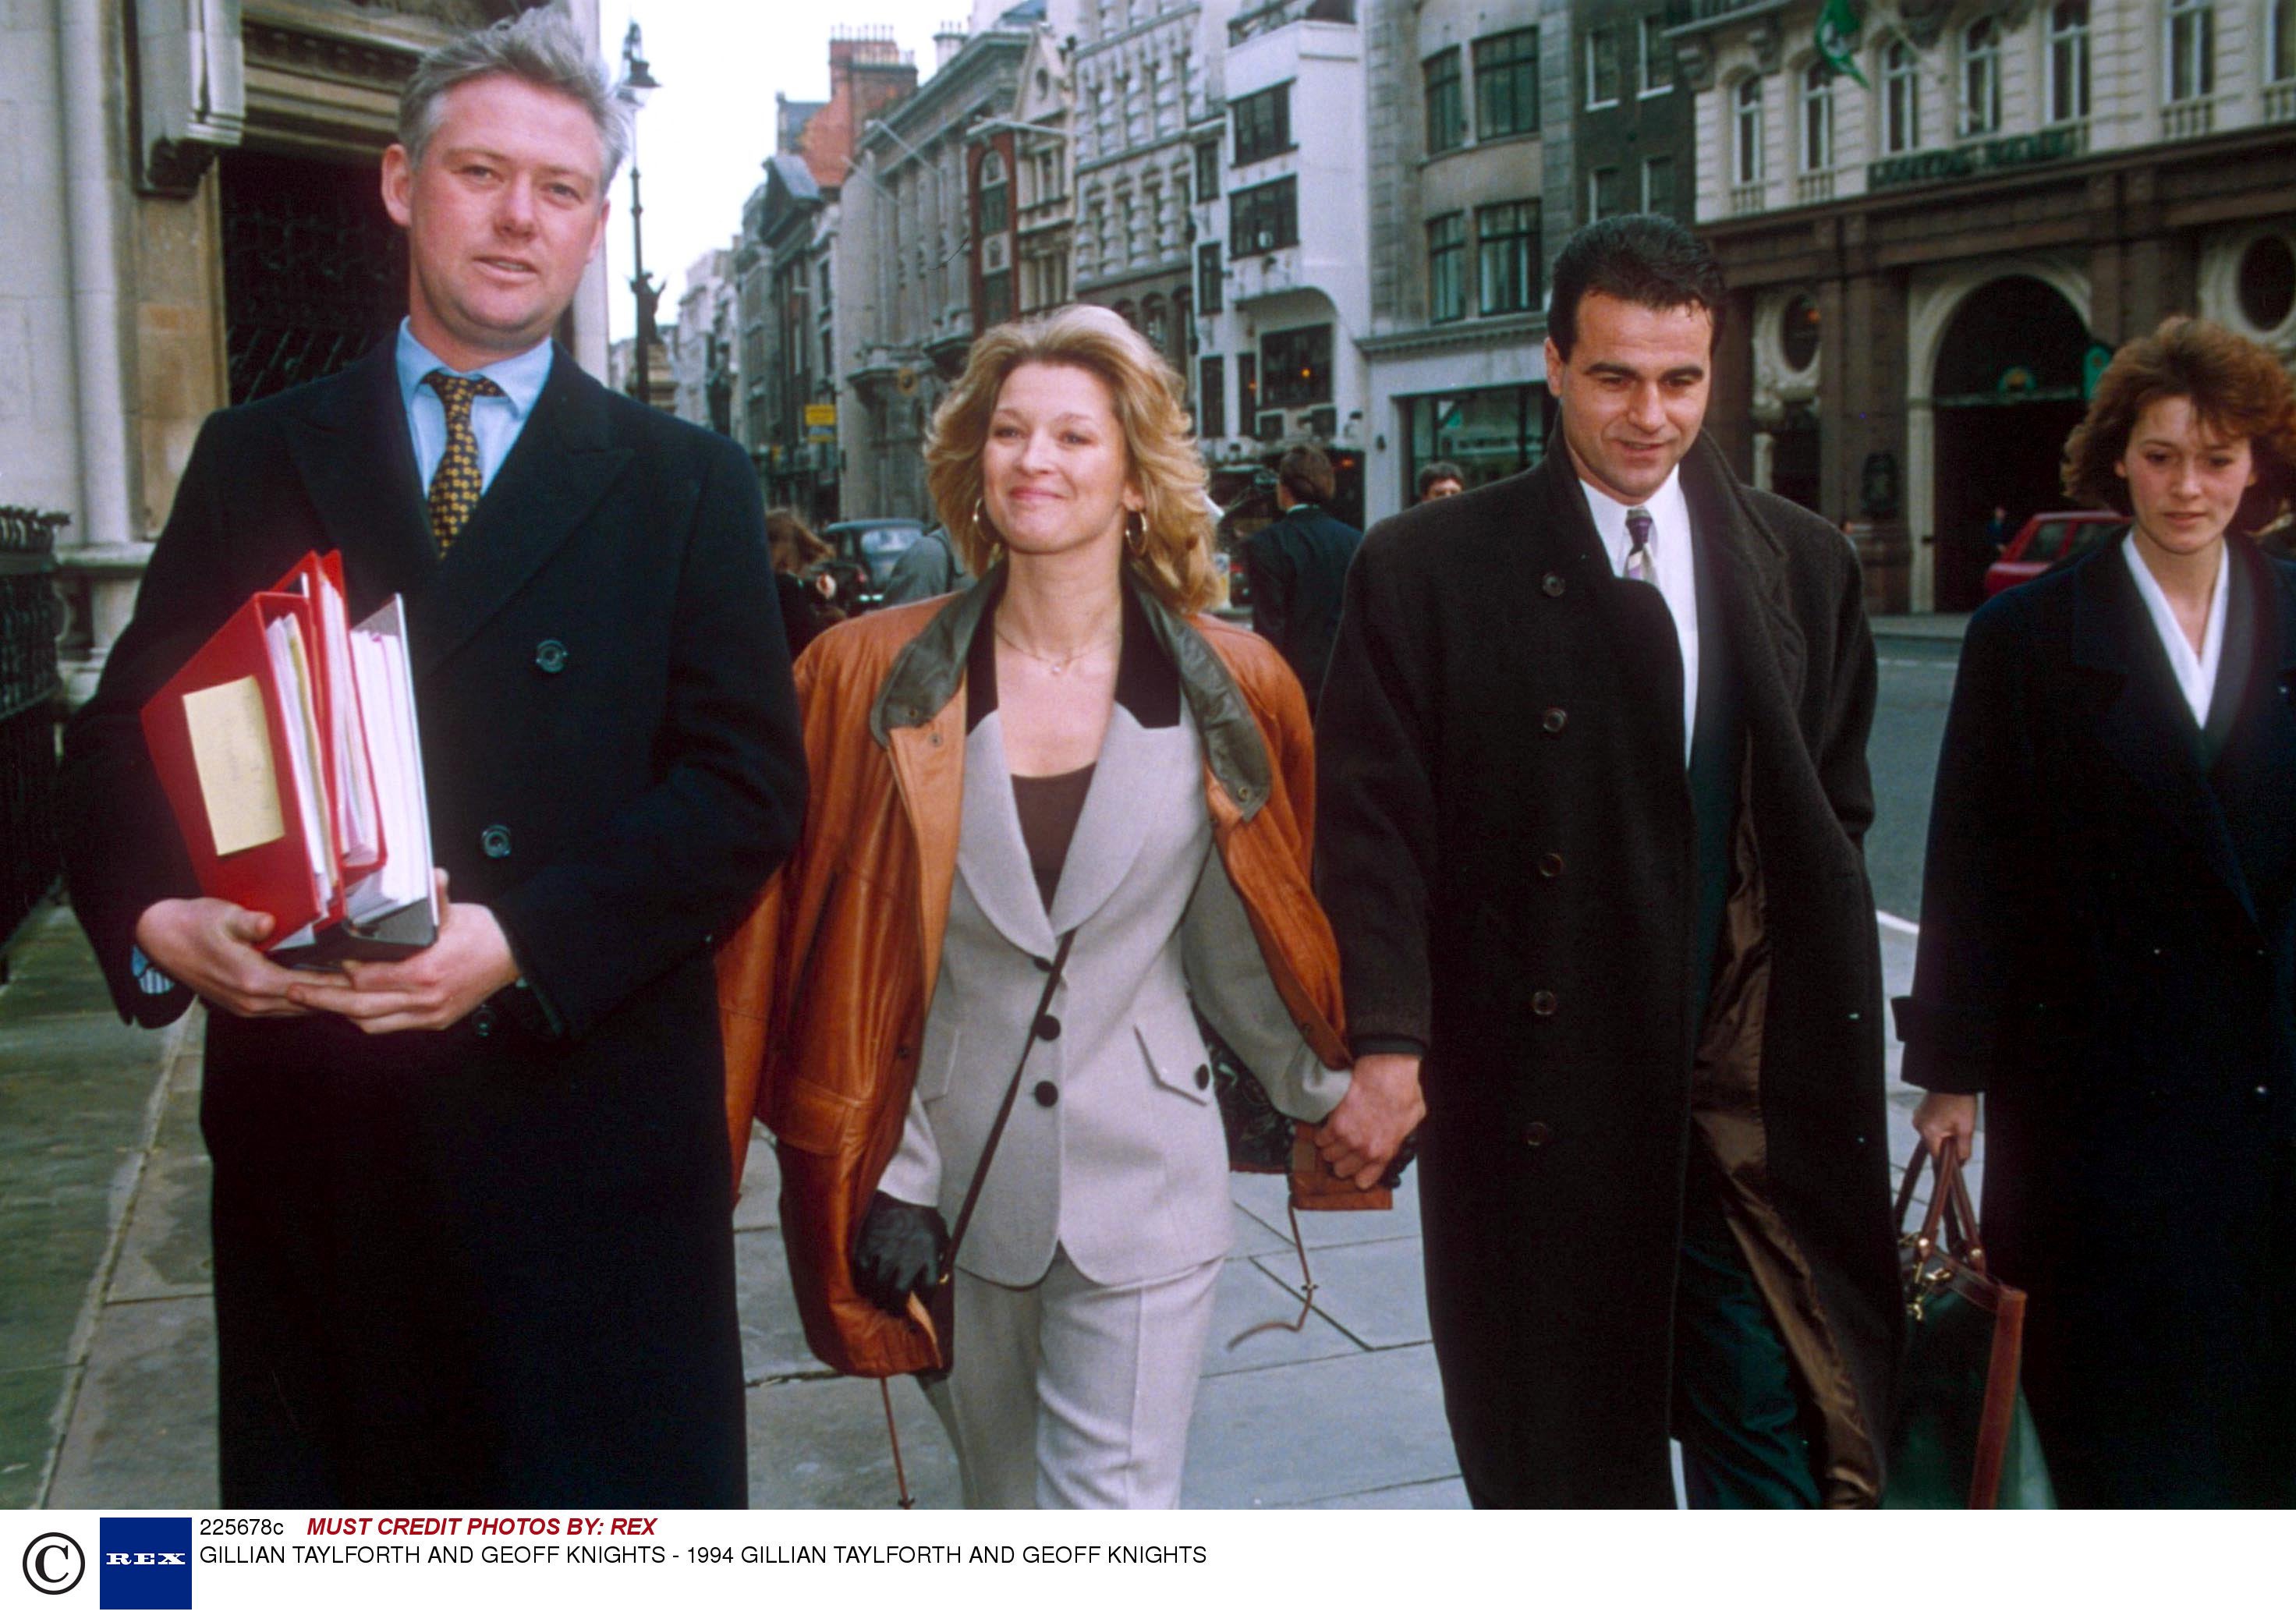 Brief encounter: Gillian Taylforth, with her partner Geoff Knights (right), arriving in court in 1994 for her libel trial with ‘The Sun’